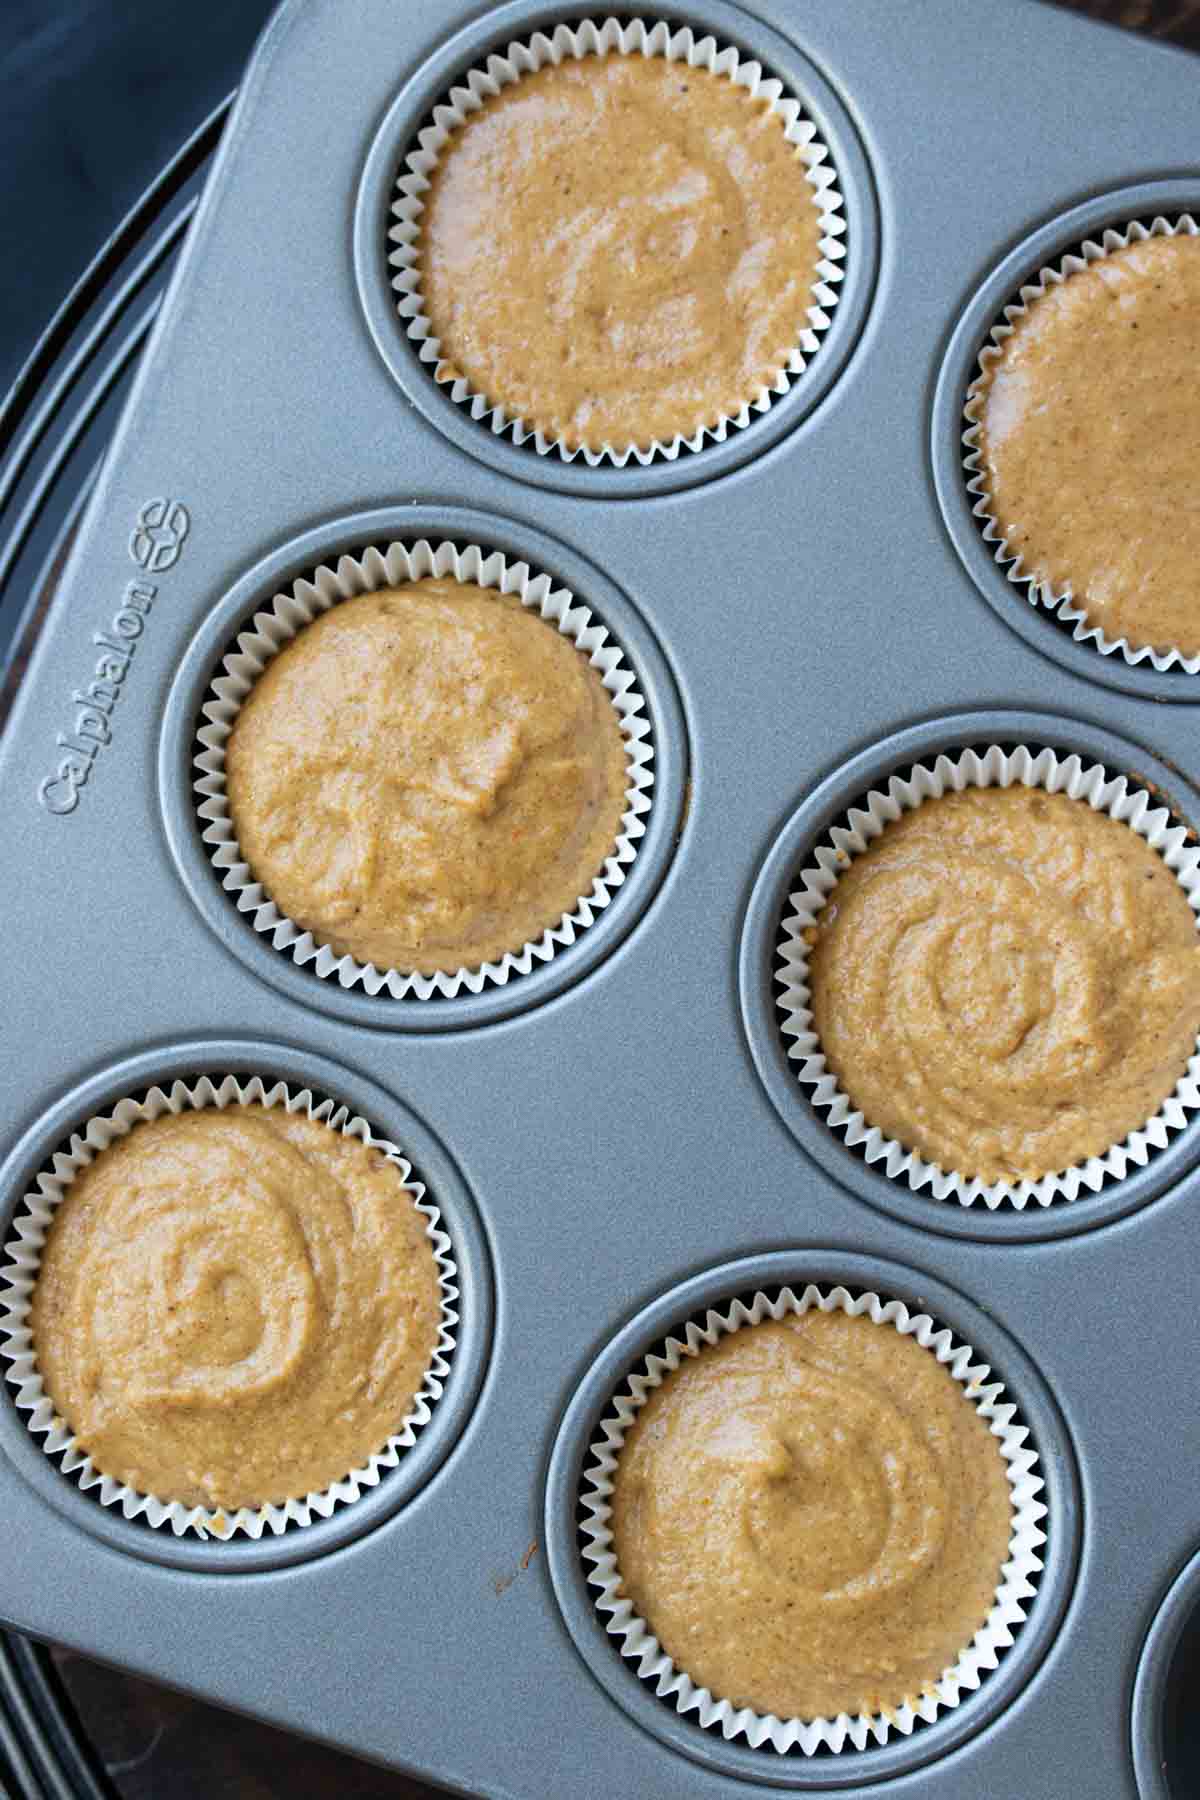 Top view of baking cups filled with pumpkin cupcake batter in muffin pan.